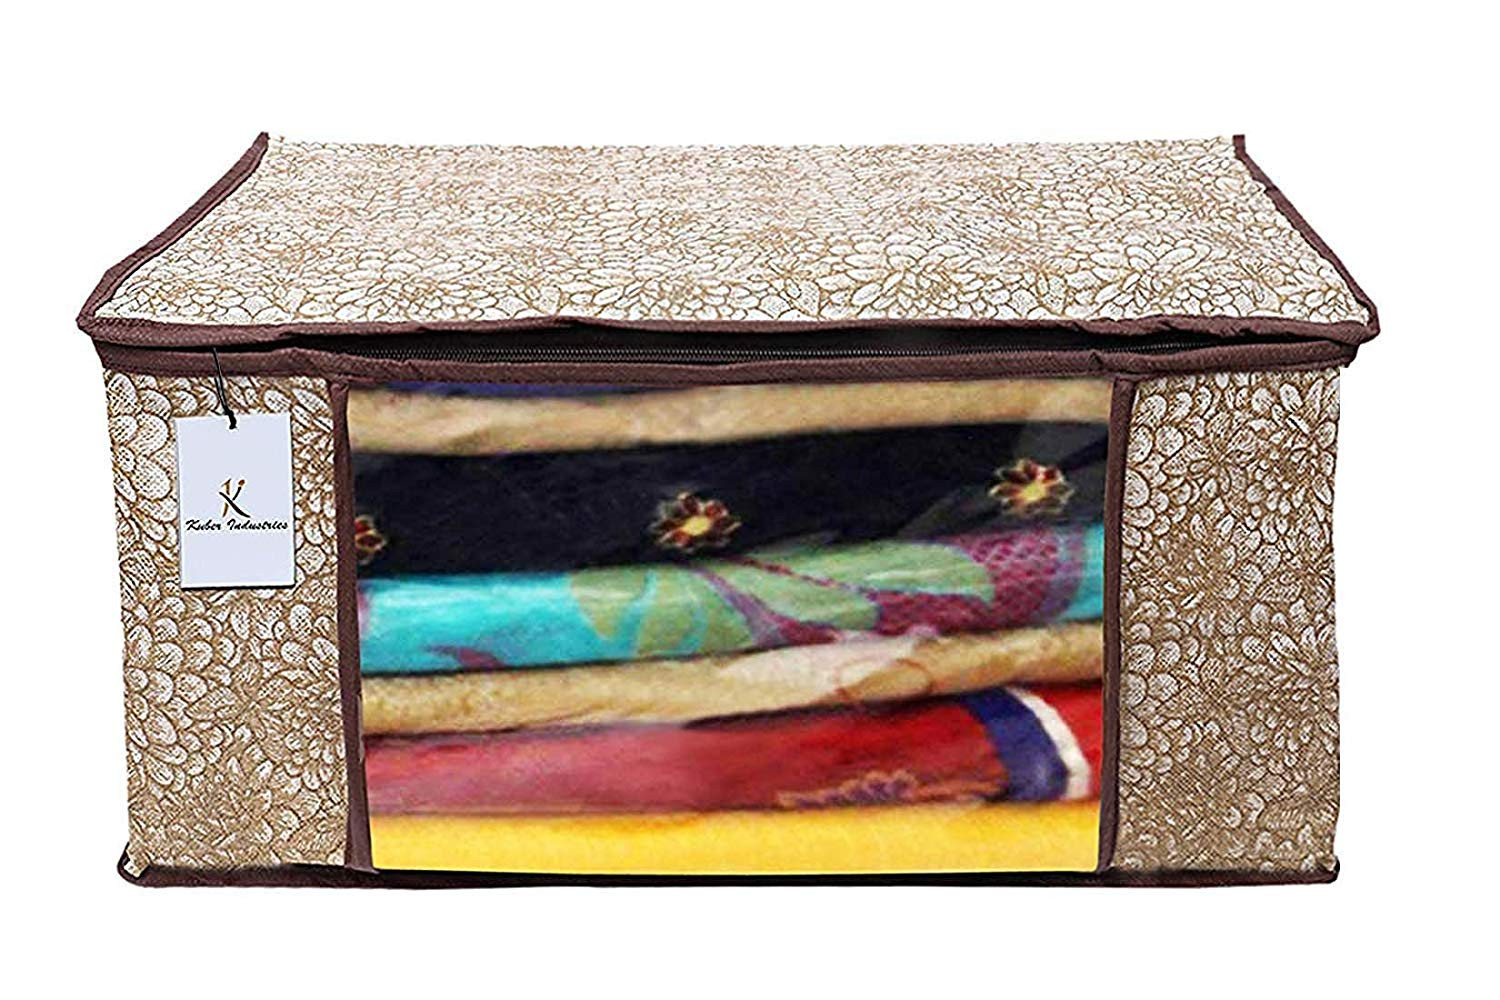 Kuber Industries Metalic Printed Non Woven Fabric Saree Cover Set with Transparent Window, Extra Large, Brown & Golden Brown & Ivory Red -CTKTC40797